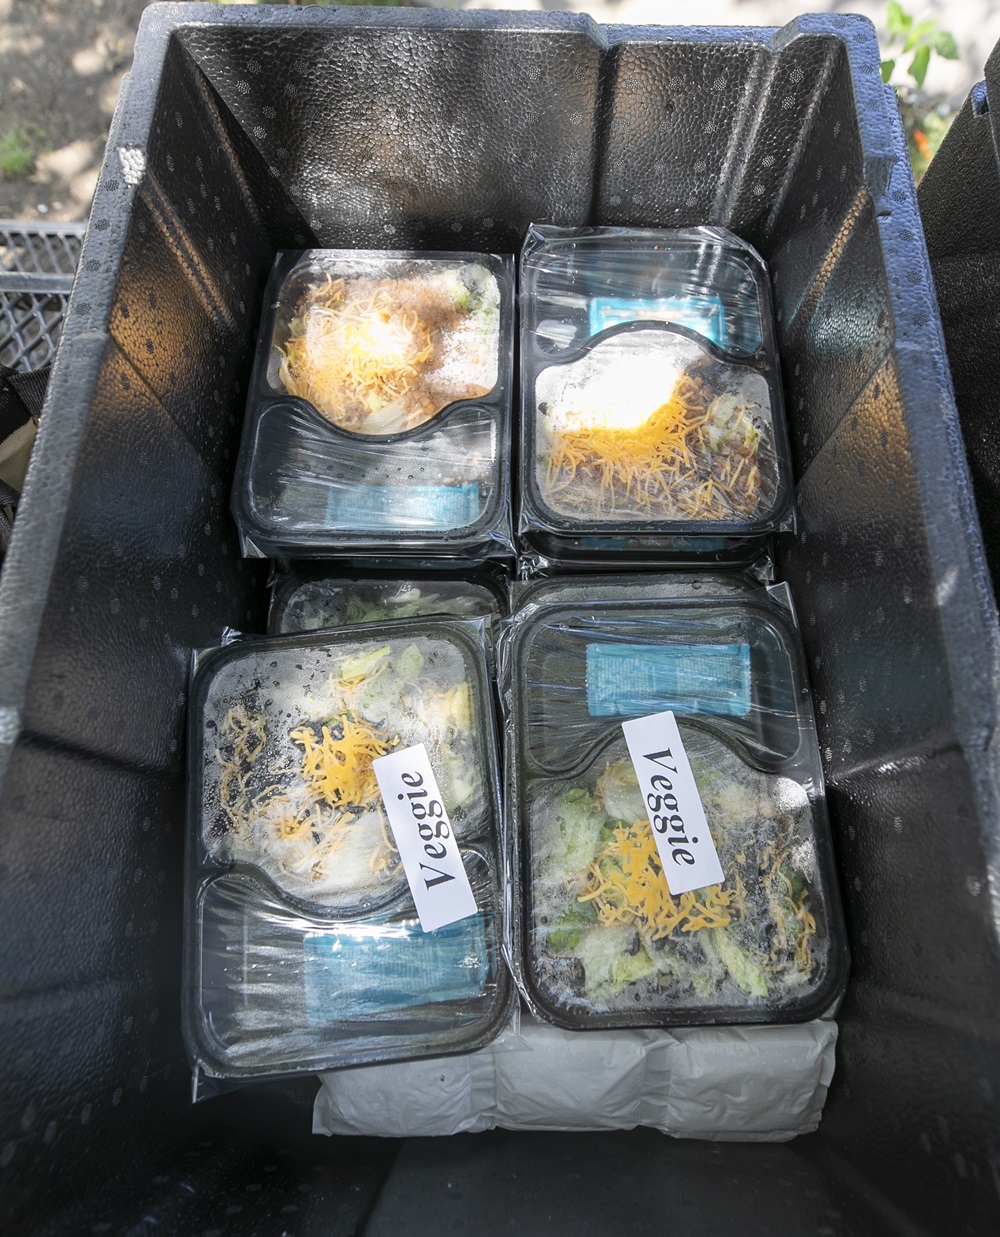 Meals from the Summer Food Program